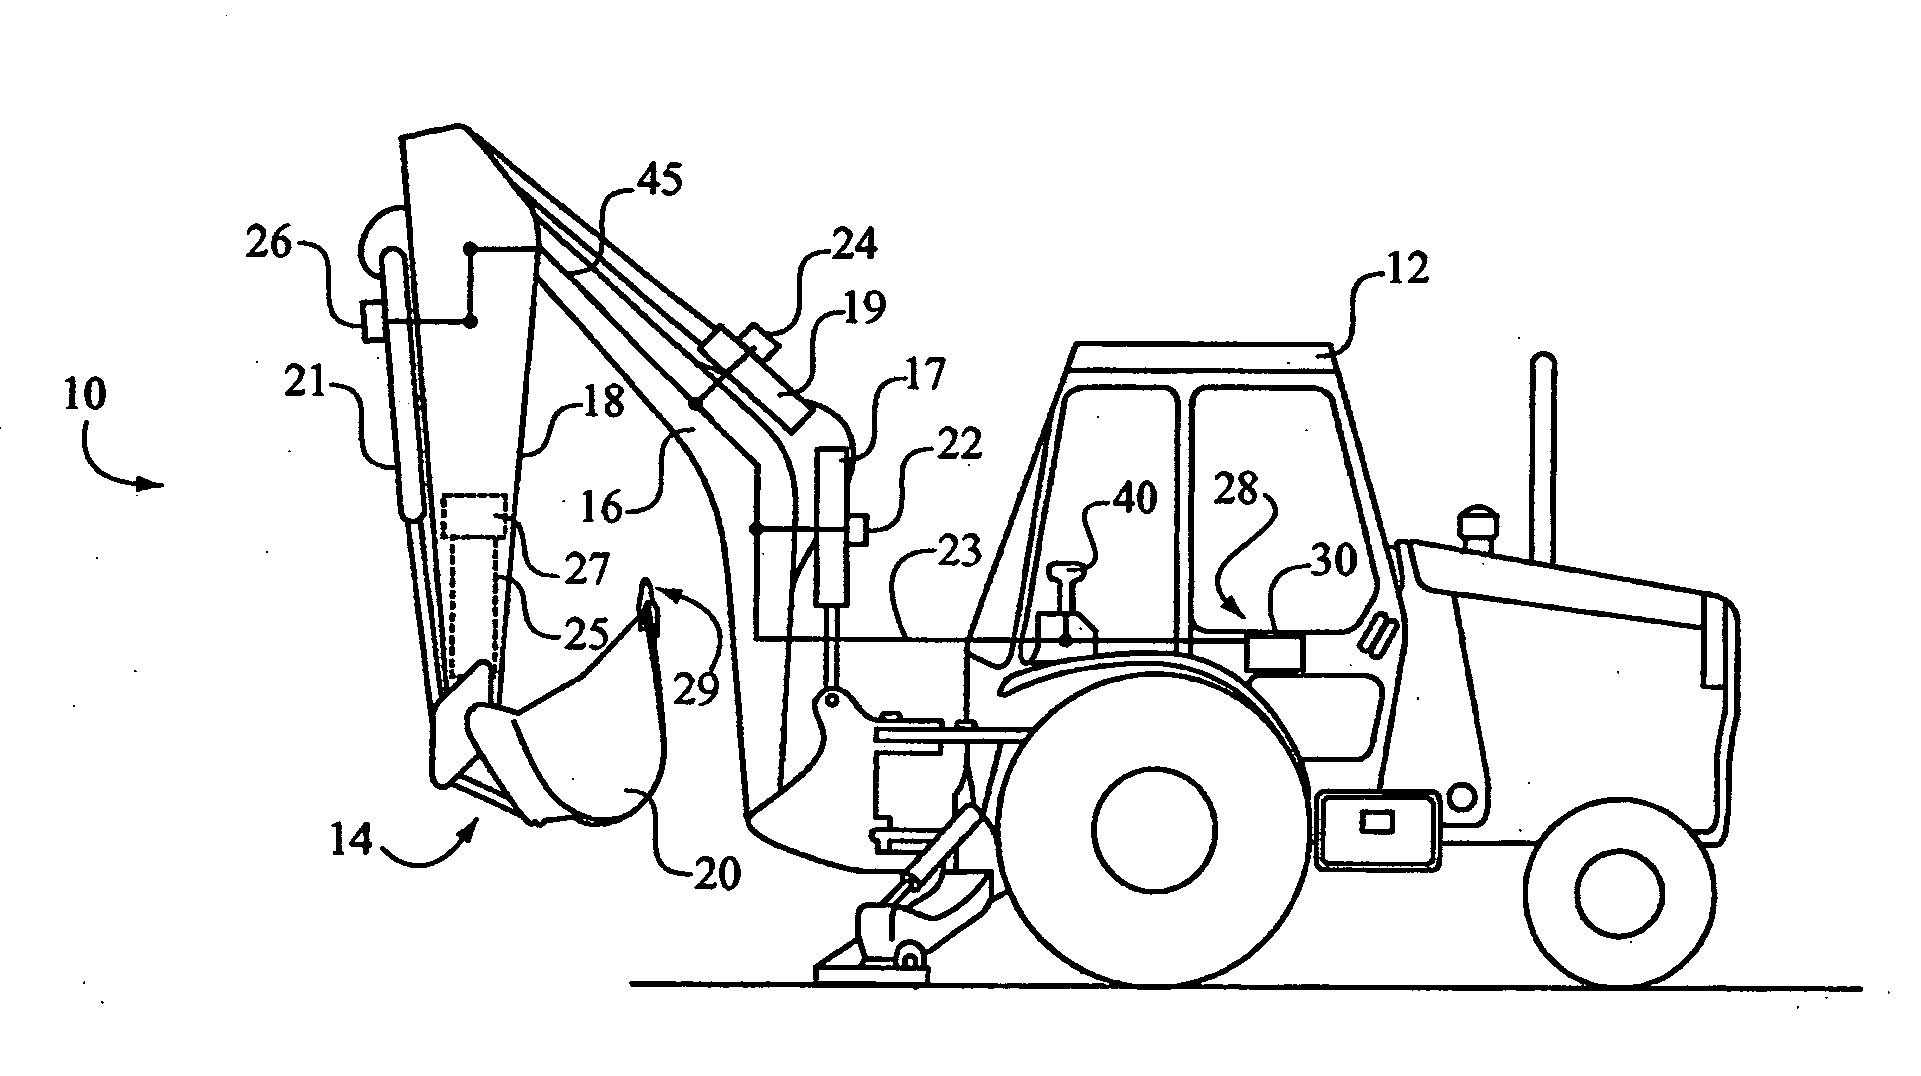 Velocity based control process for a machine digging cycle